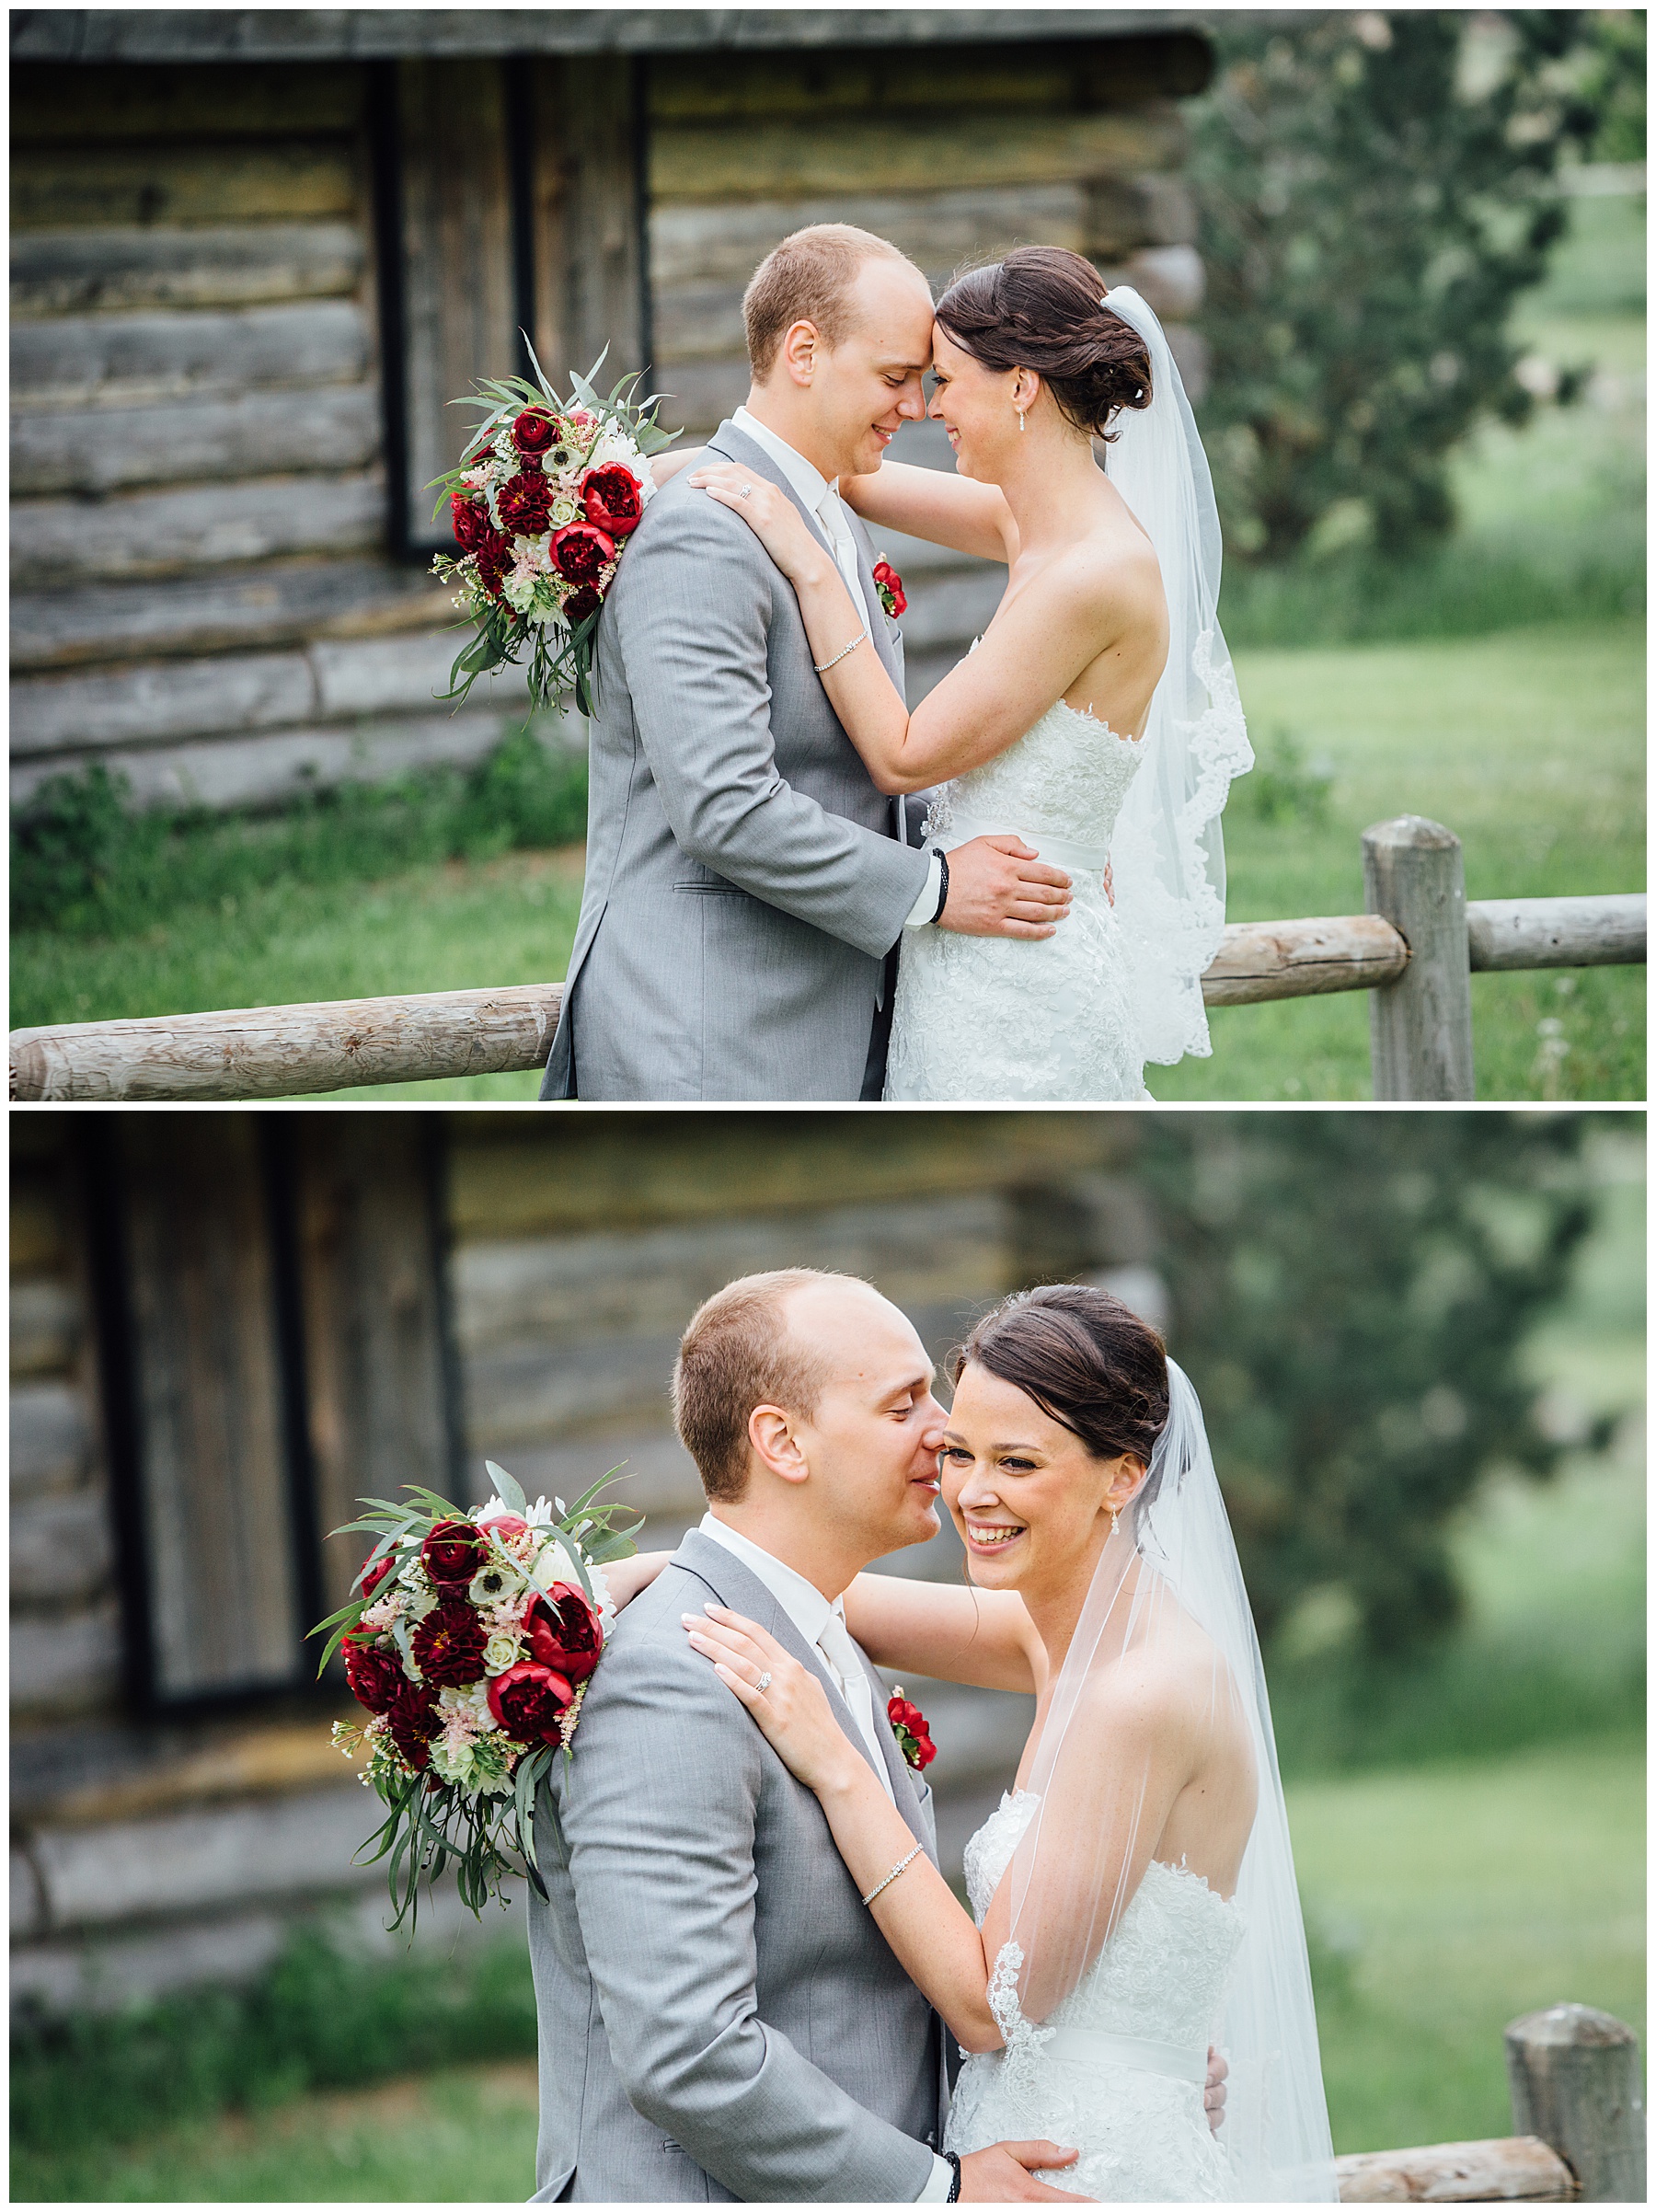 Bride and groom together in front of log cabin